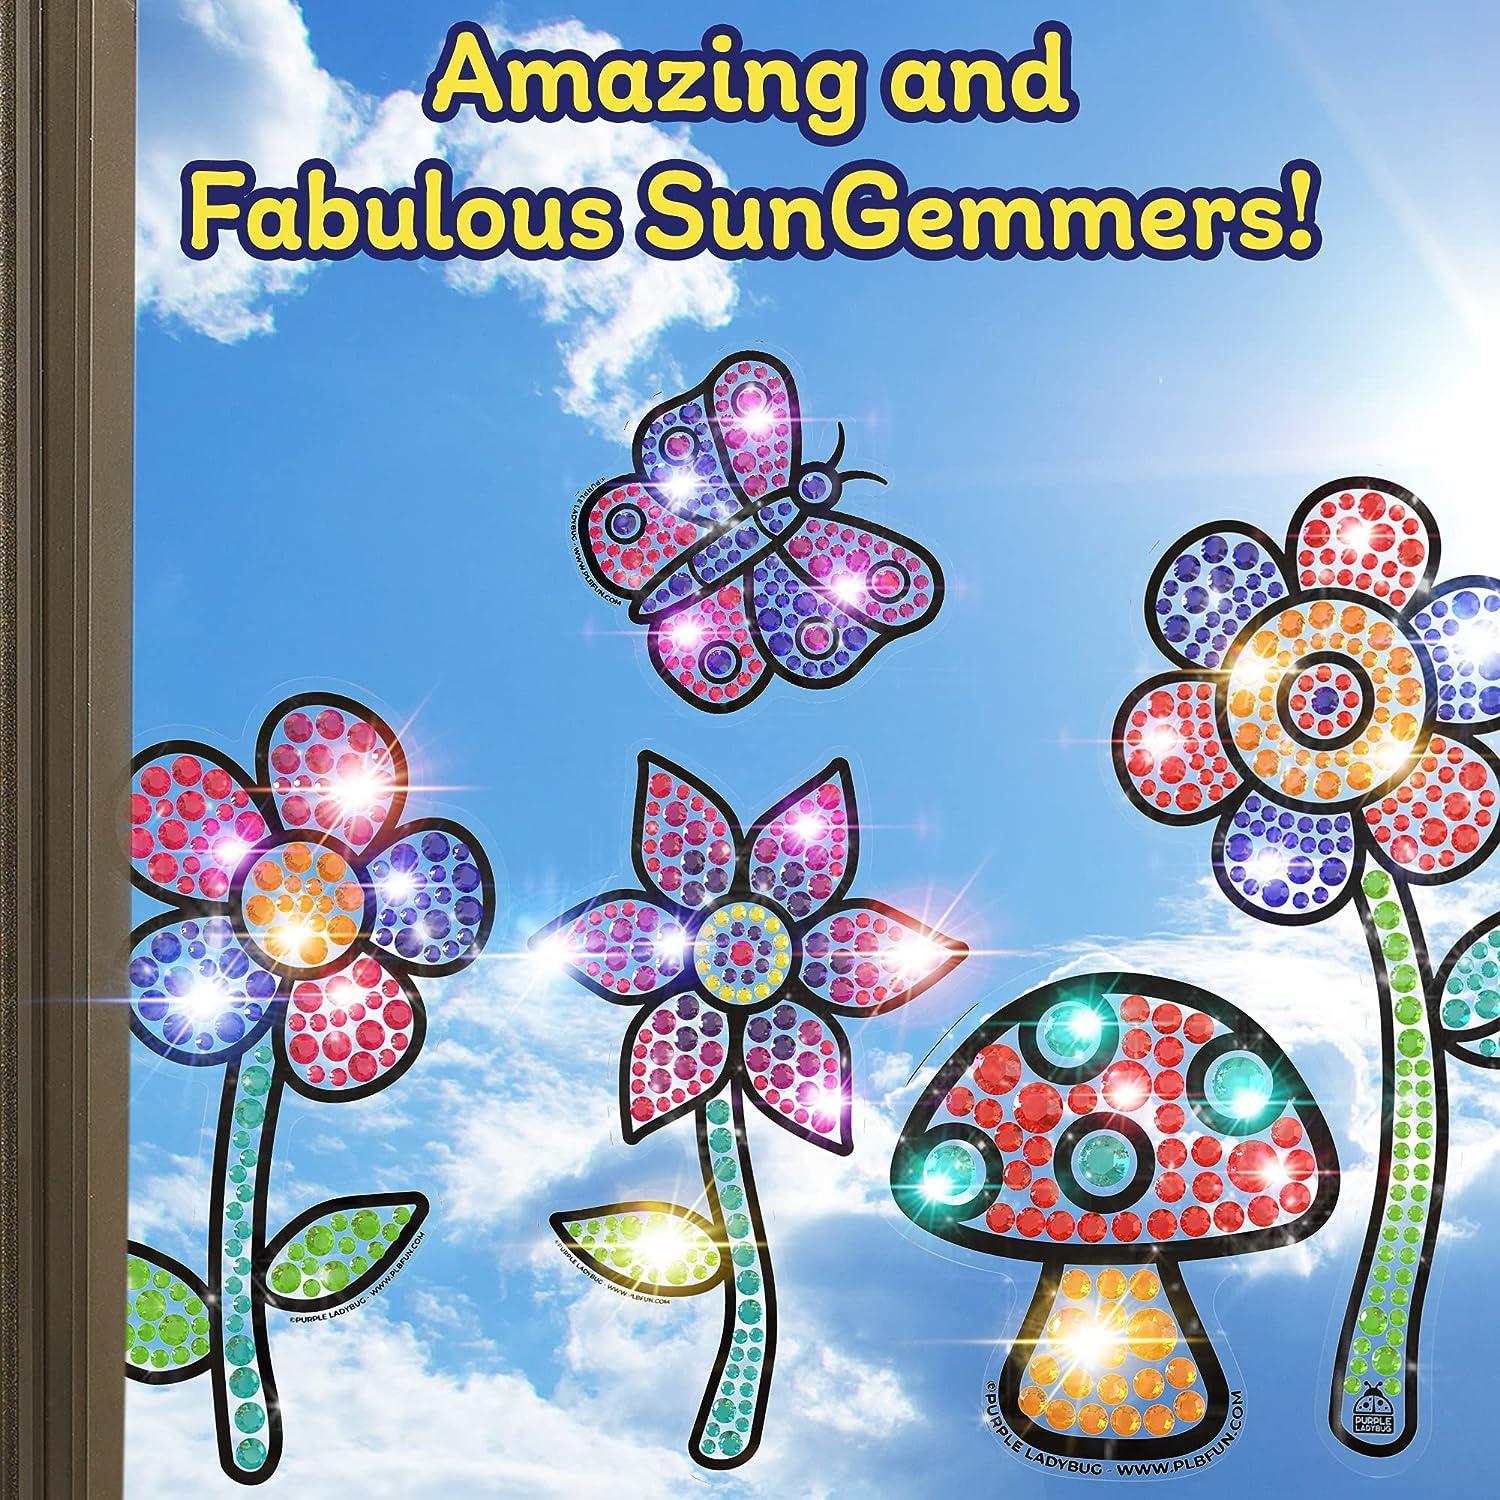 Purple Ladybug SUNGEMMERS Diamond Window Art Craft Kits for Kids 8-12 - Fun for Girls Ages 8-12, Spring Crafts for Kids Ages 8-12 - Great 6